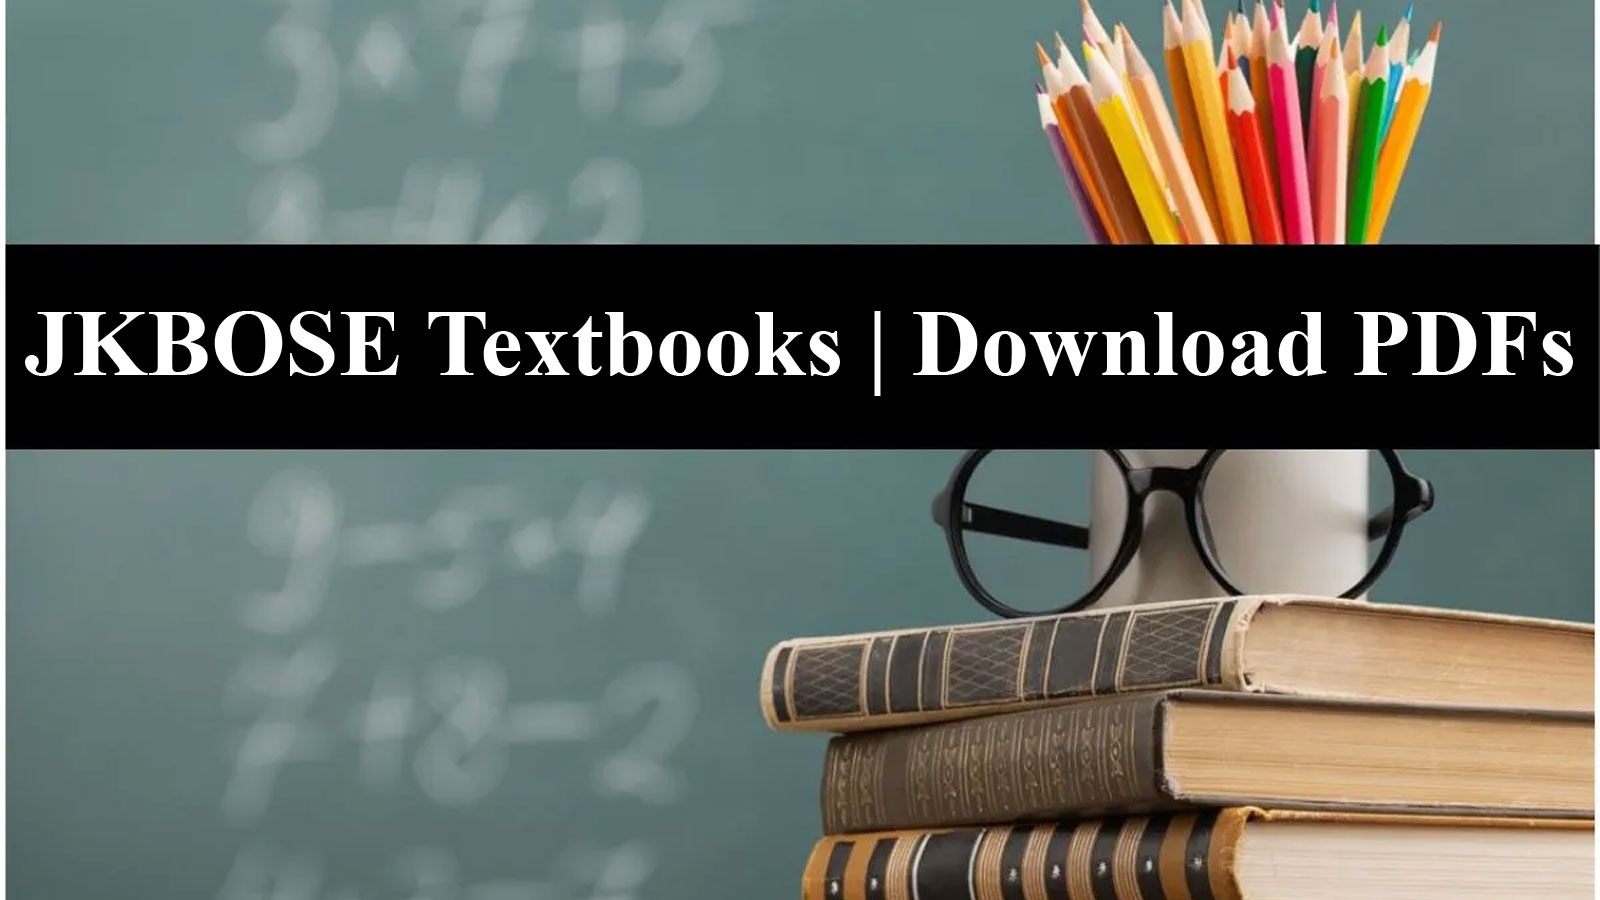 JKBOSE Class 4th Textbooks; Direct Link to Download PDFs